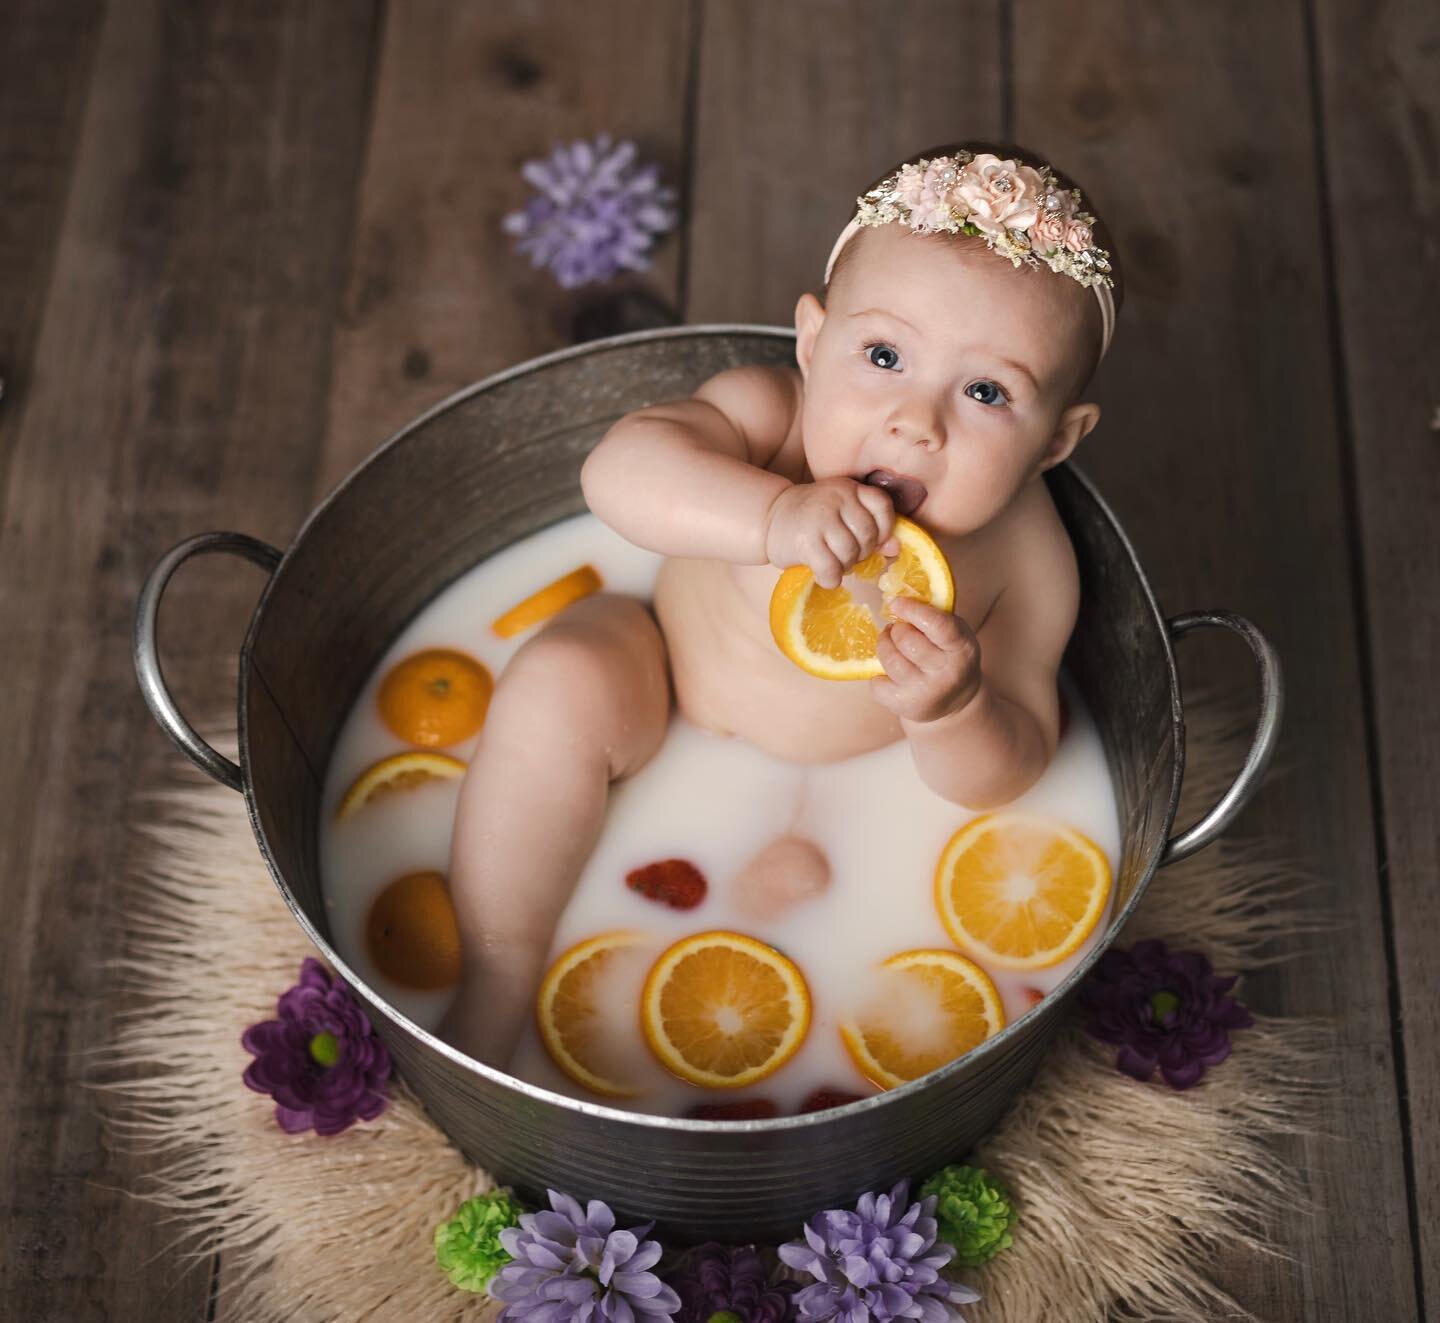 Fruit baths are so cute they are one of my favourite sessions to do! Outdoors is beautiful for these too on a warm day but indoors is preferable since we can control the temperature of the water and the room to make your baby comfortable. 
Hope every